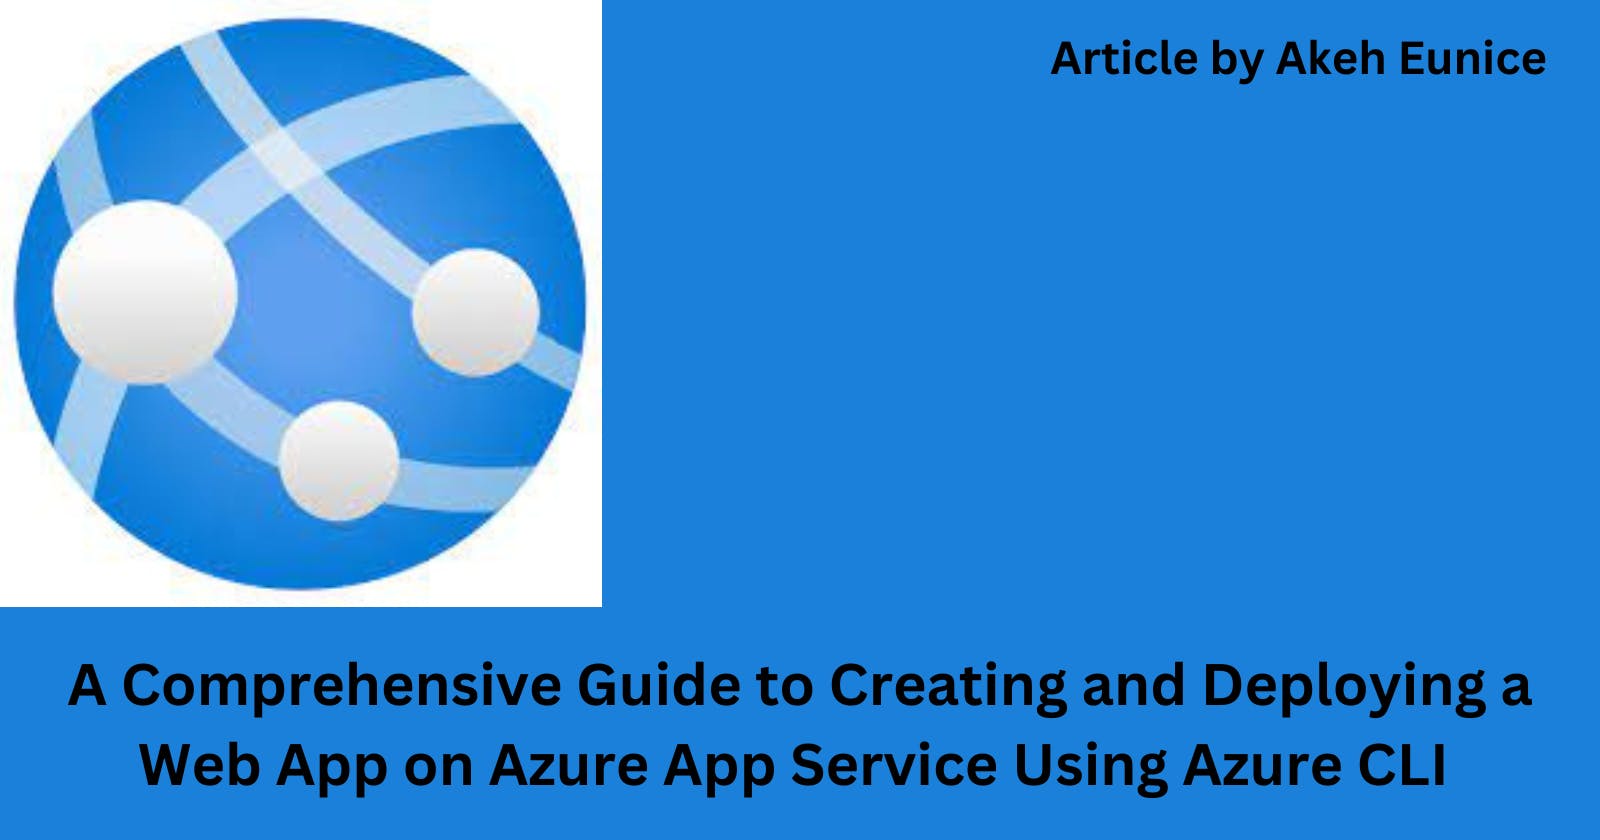 A Comprehensive Guide to Creating and Deploying a Web App on Azure App Service Using Azure CLI